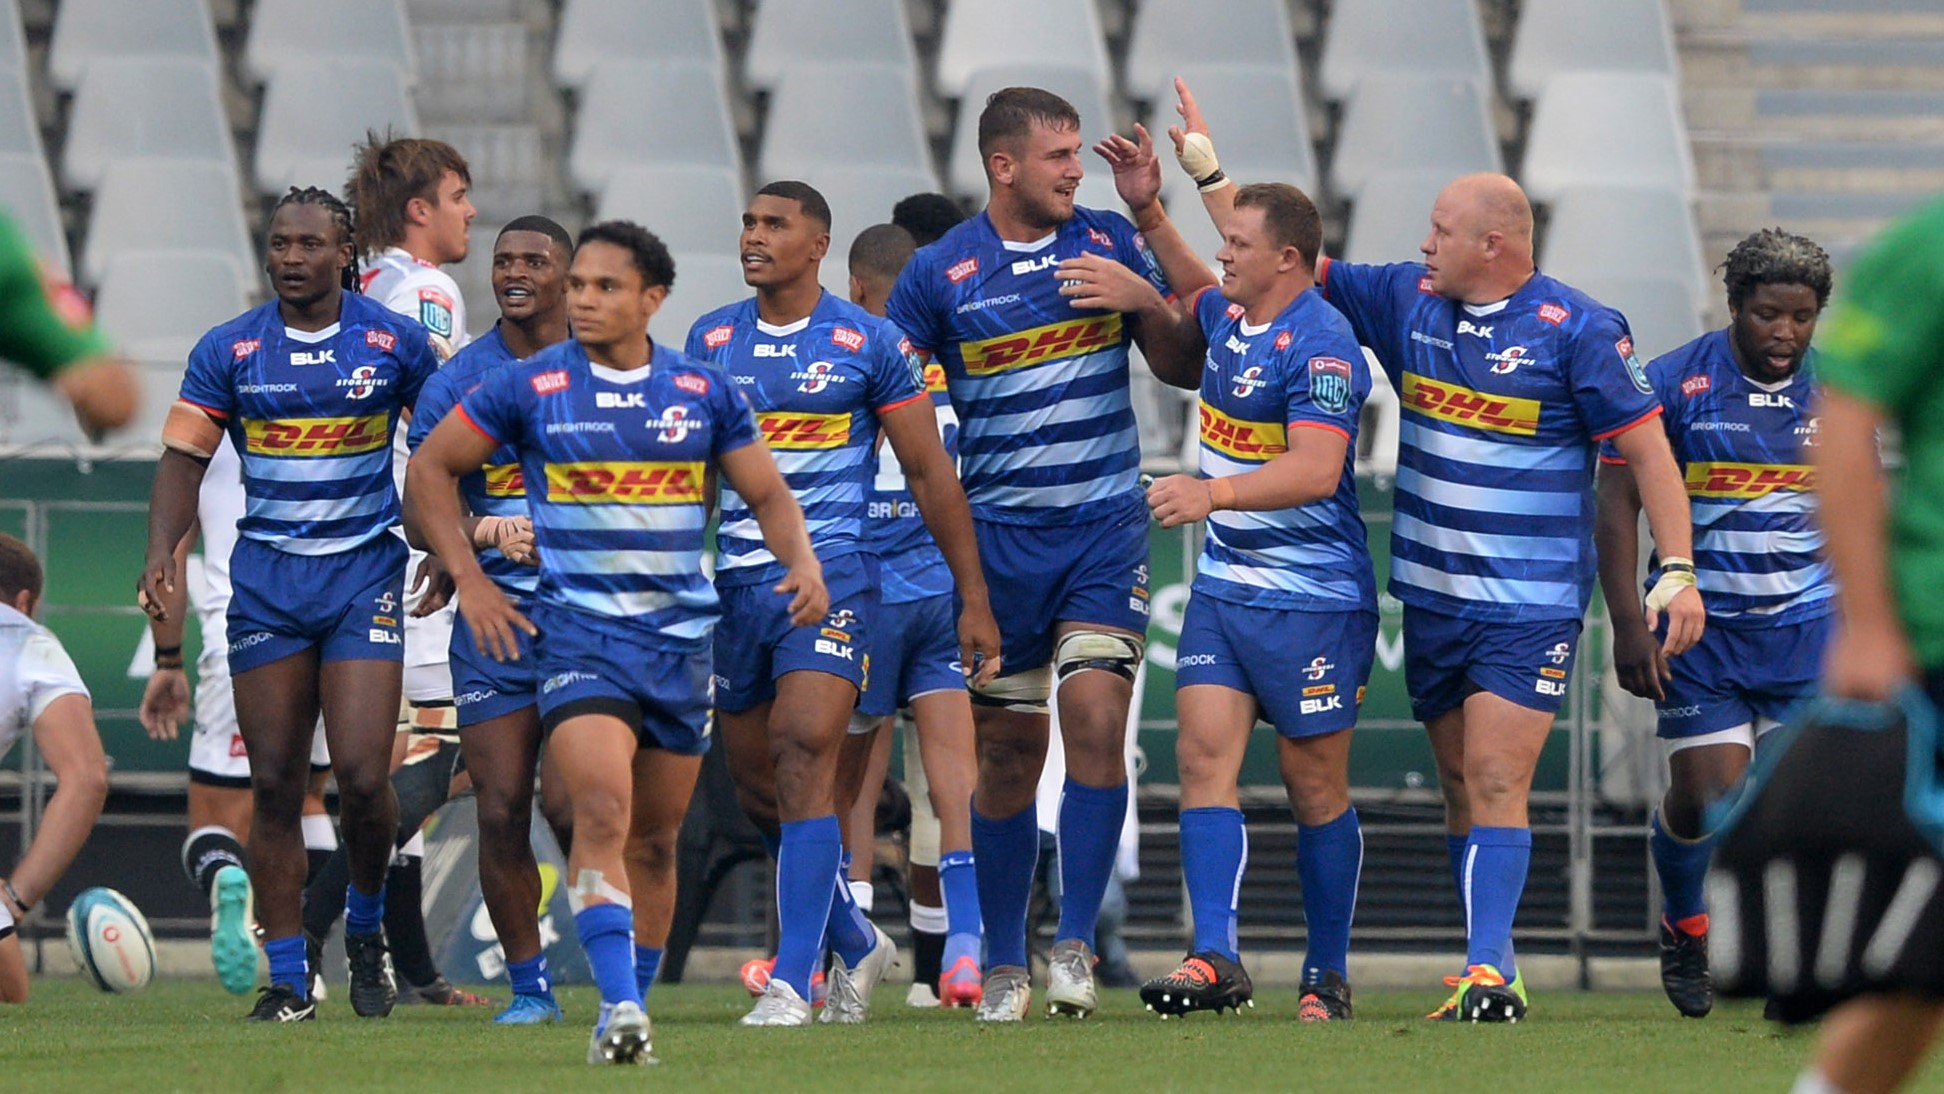 Stormers celebrate a try scored by Adre Smith of the Stormers during the United Rugby Championship 2021/22 game between the Stormers and the Sharks at Cape Town Stadium on 5 February 2022 © Ryan Wilkisky/BackpagePix